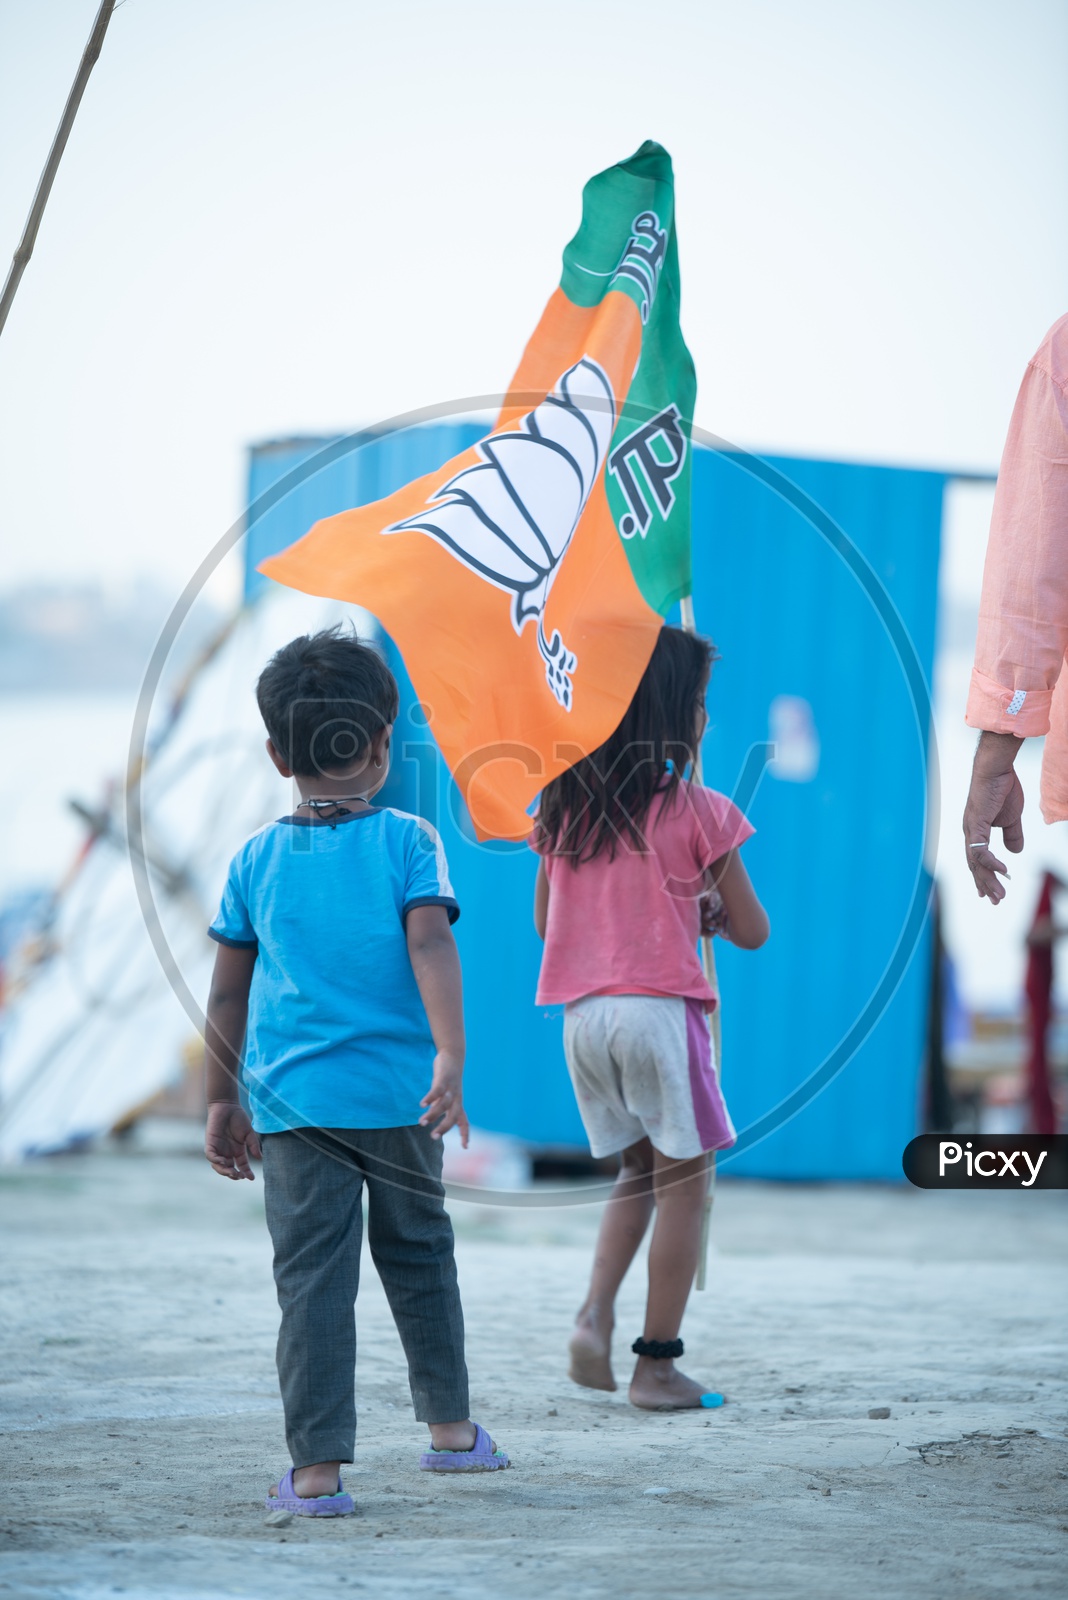 Children Holding The BJP Party Flags During Election Campaigns